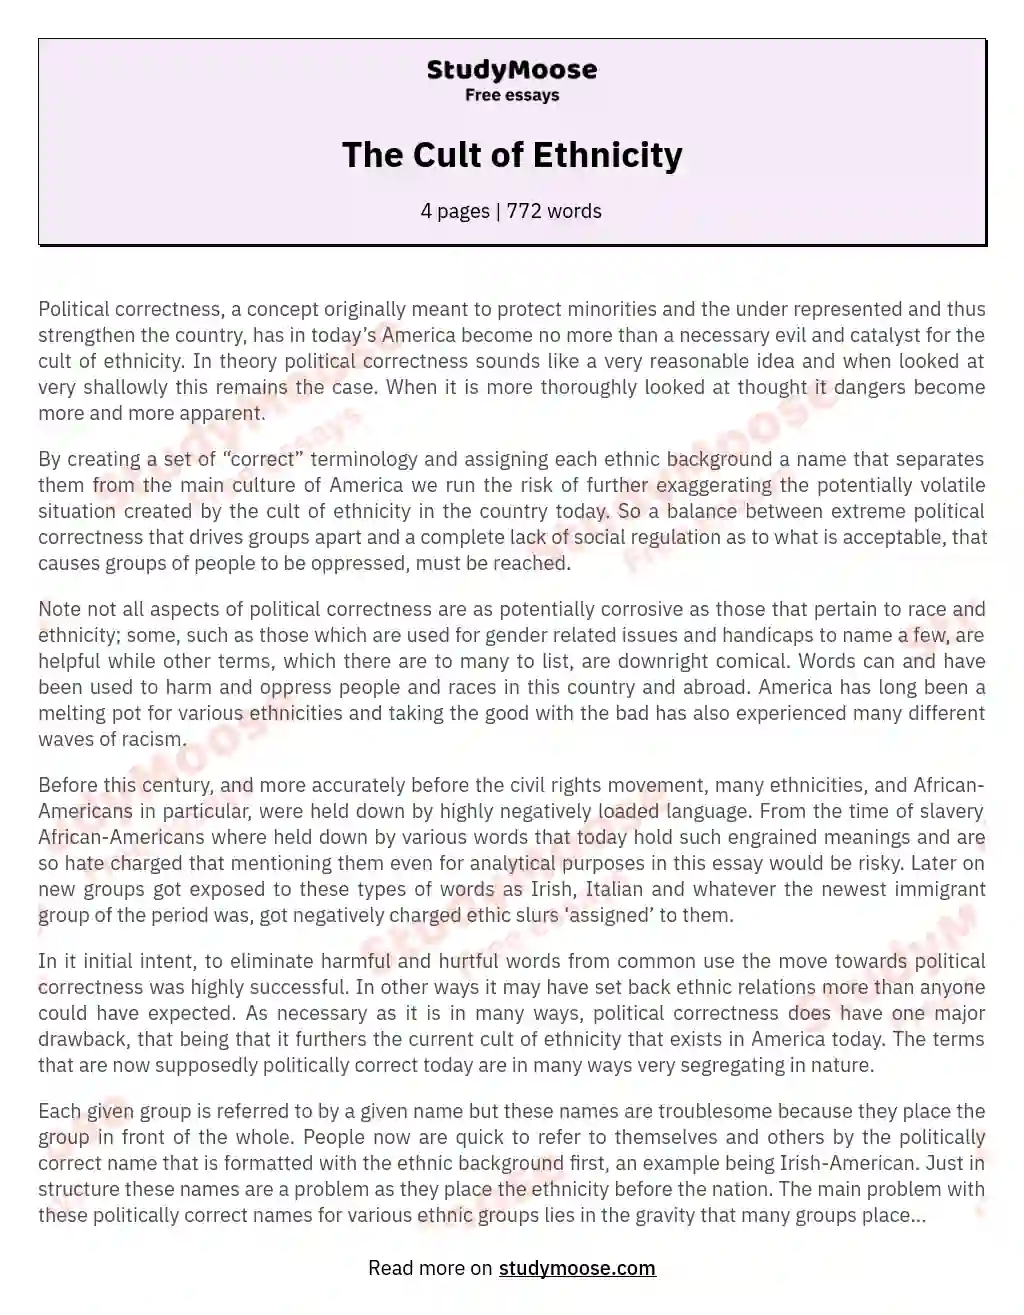 The Cult of Ethnicity essay